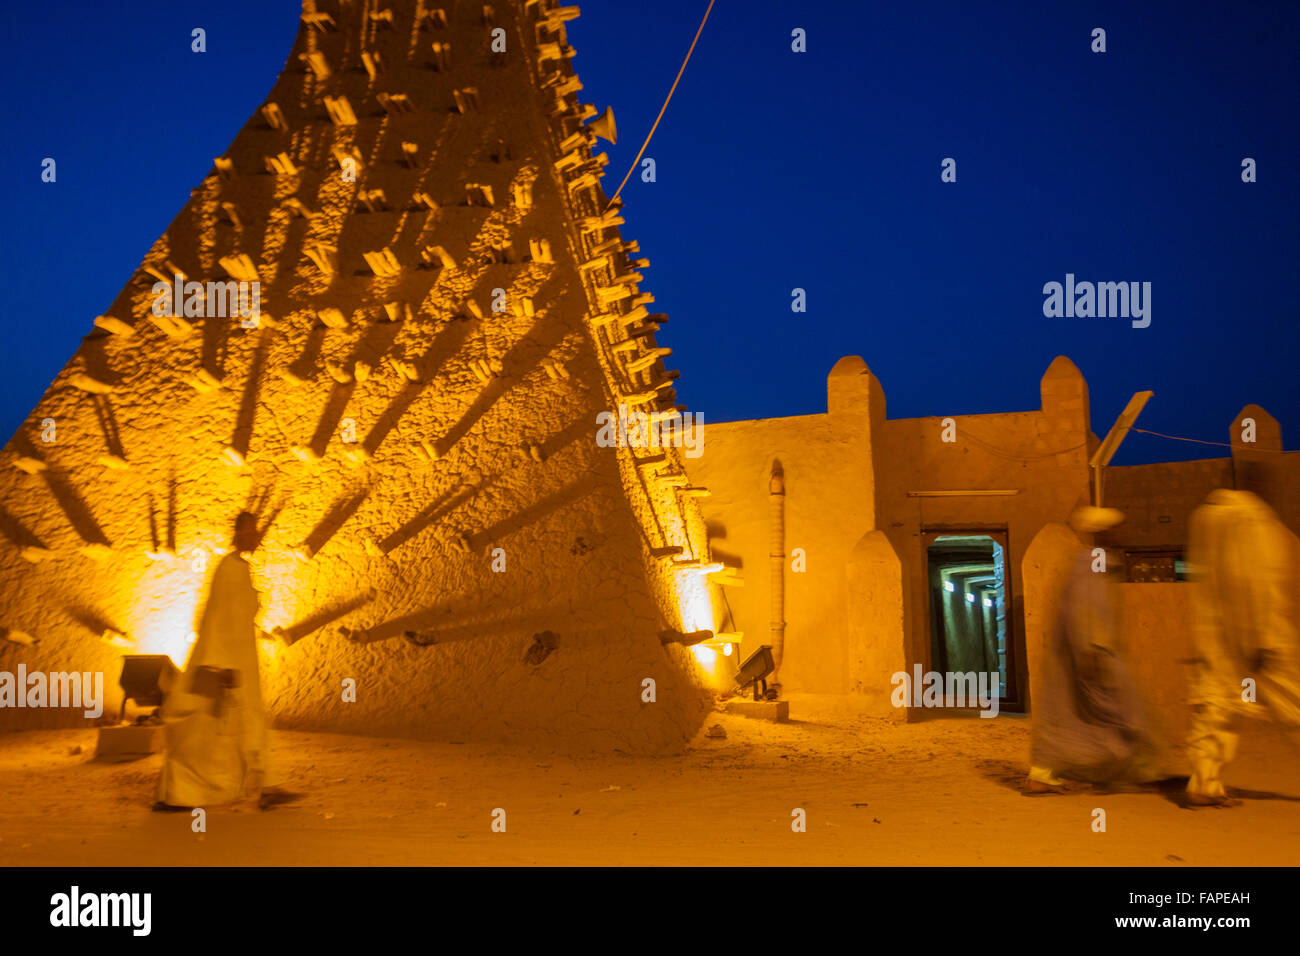 The main Timbuktu mosque lit up by night Stock Photo